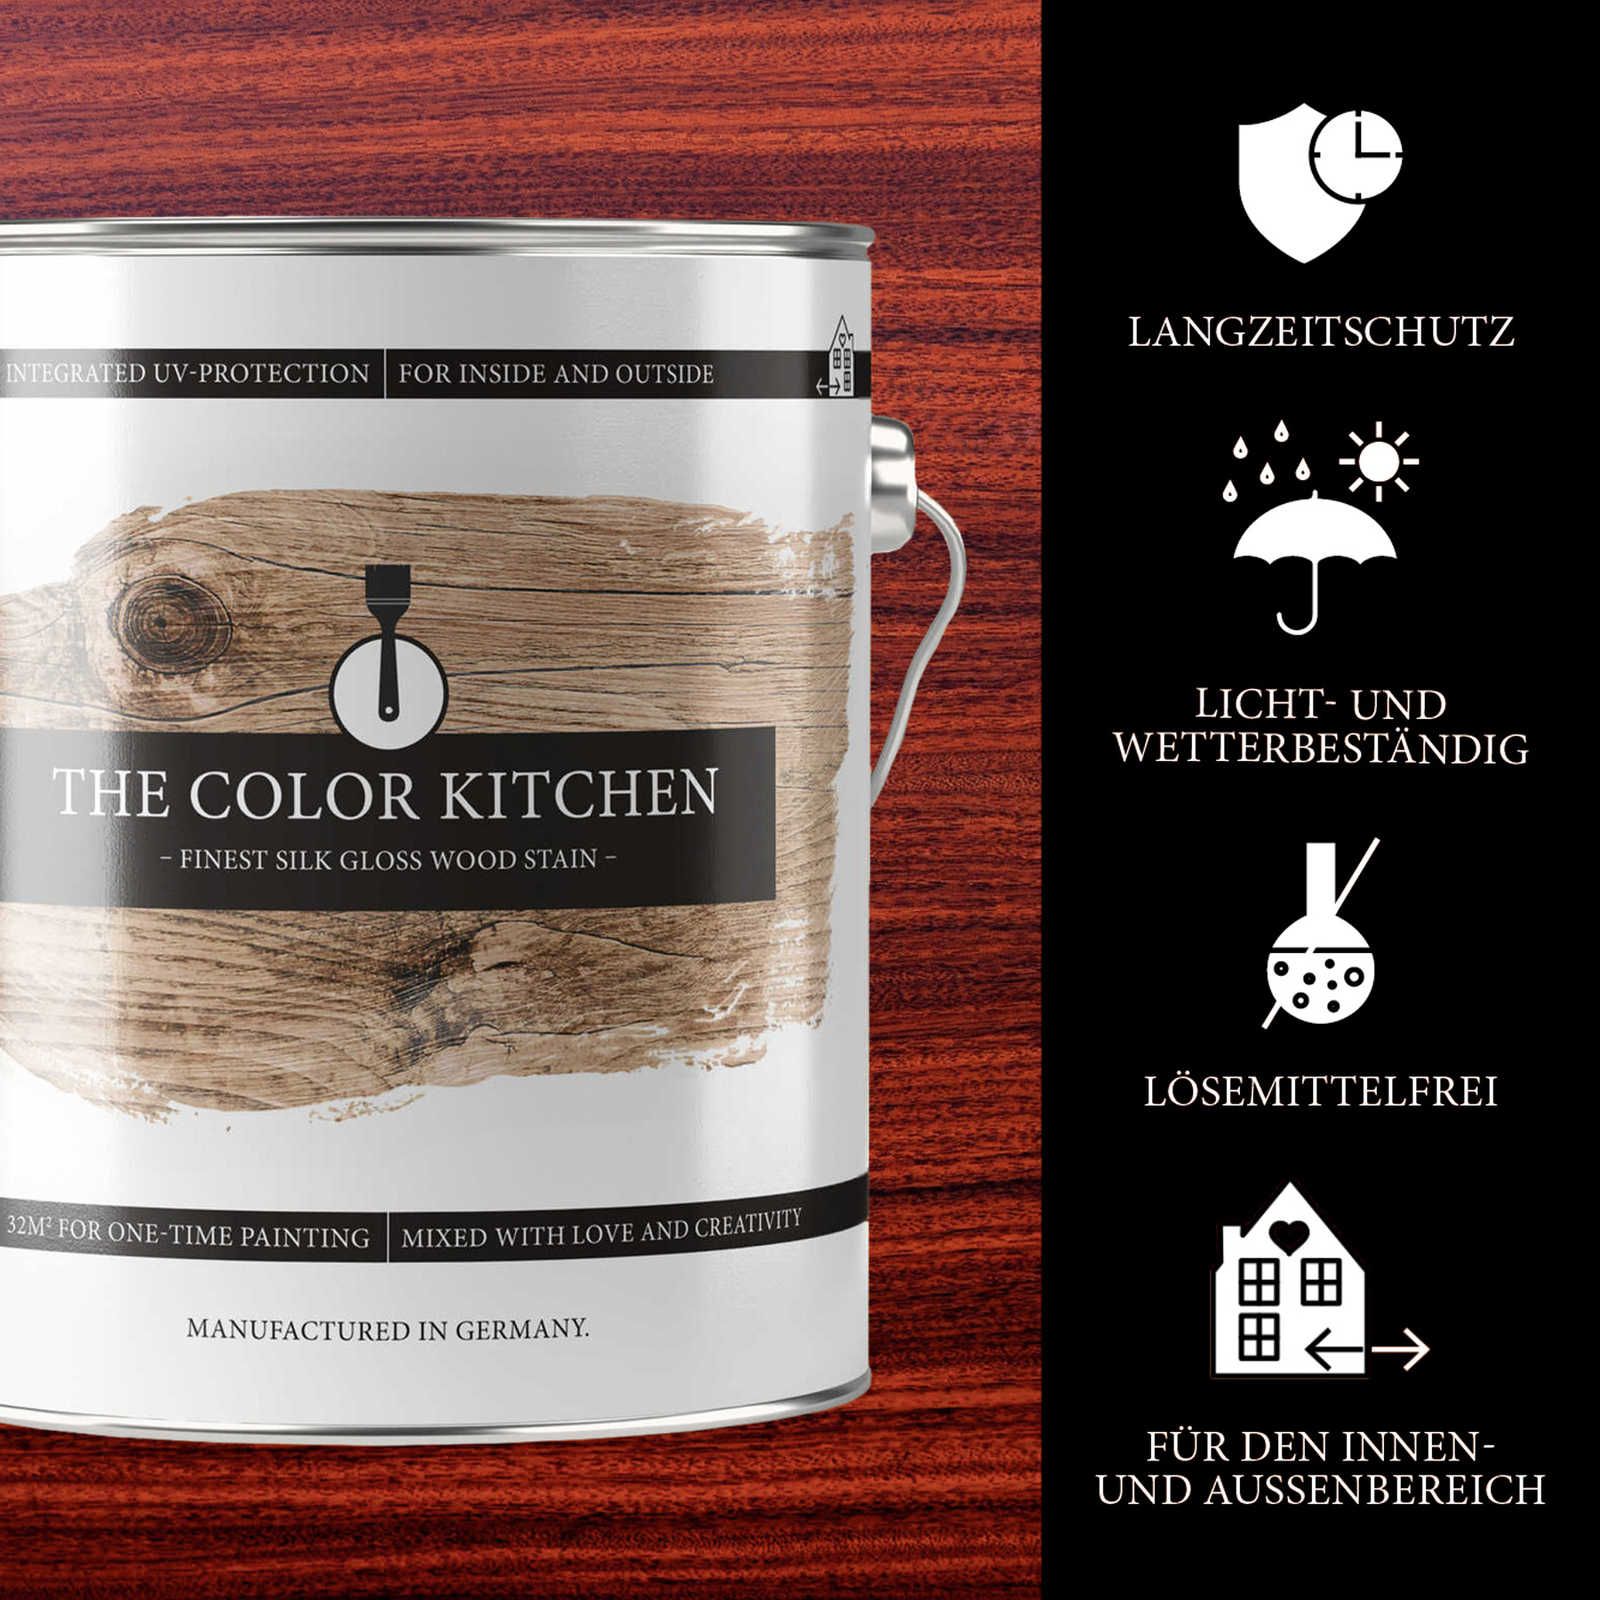             Wood stain »Palisander« silk-glossy for interior & exterior - 2,5 litre
        